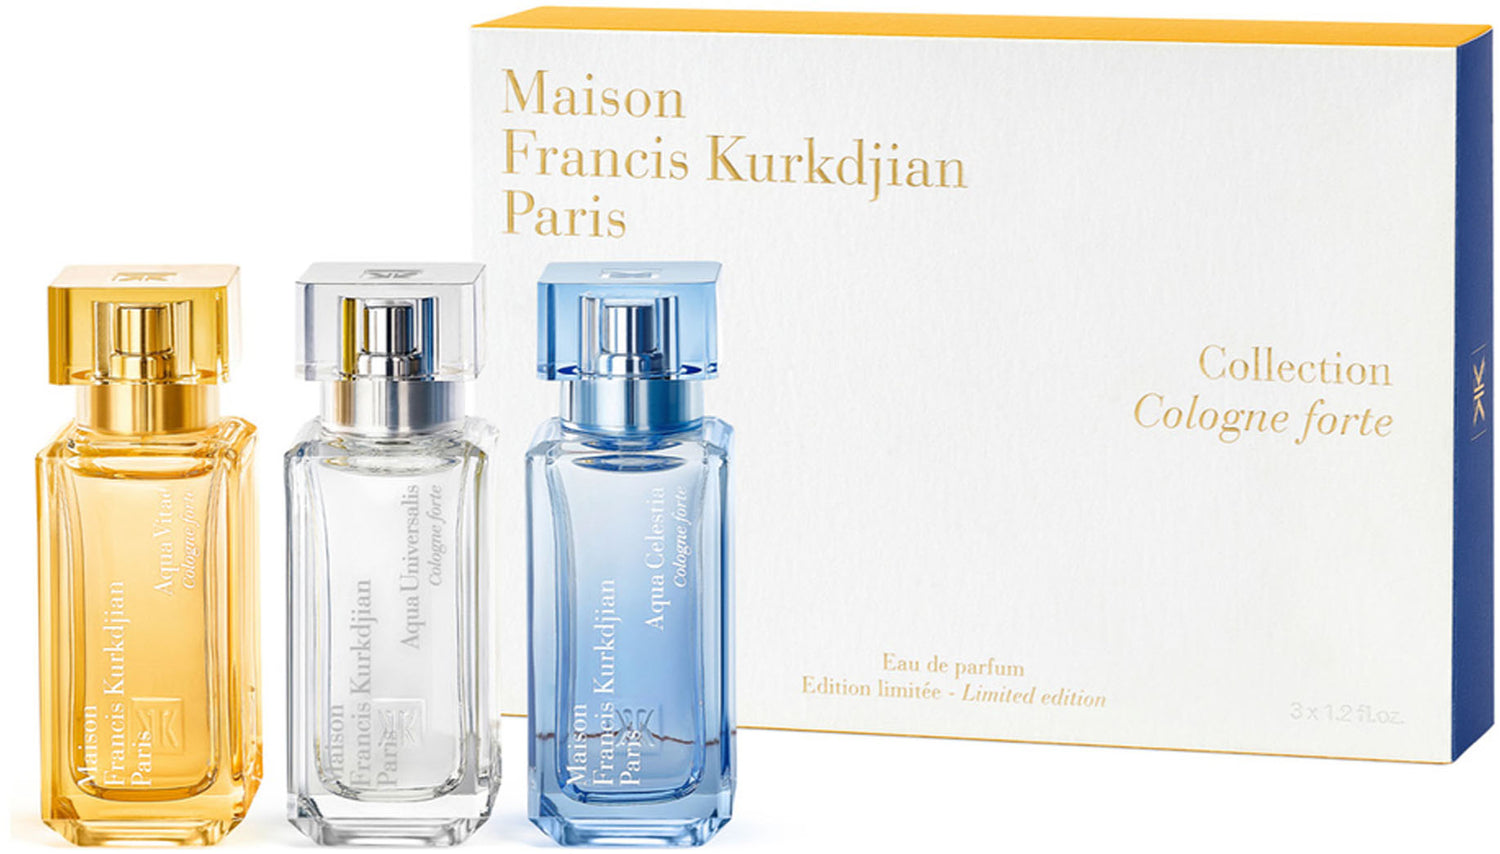 set cologne forte collection